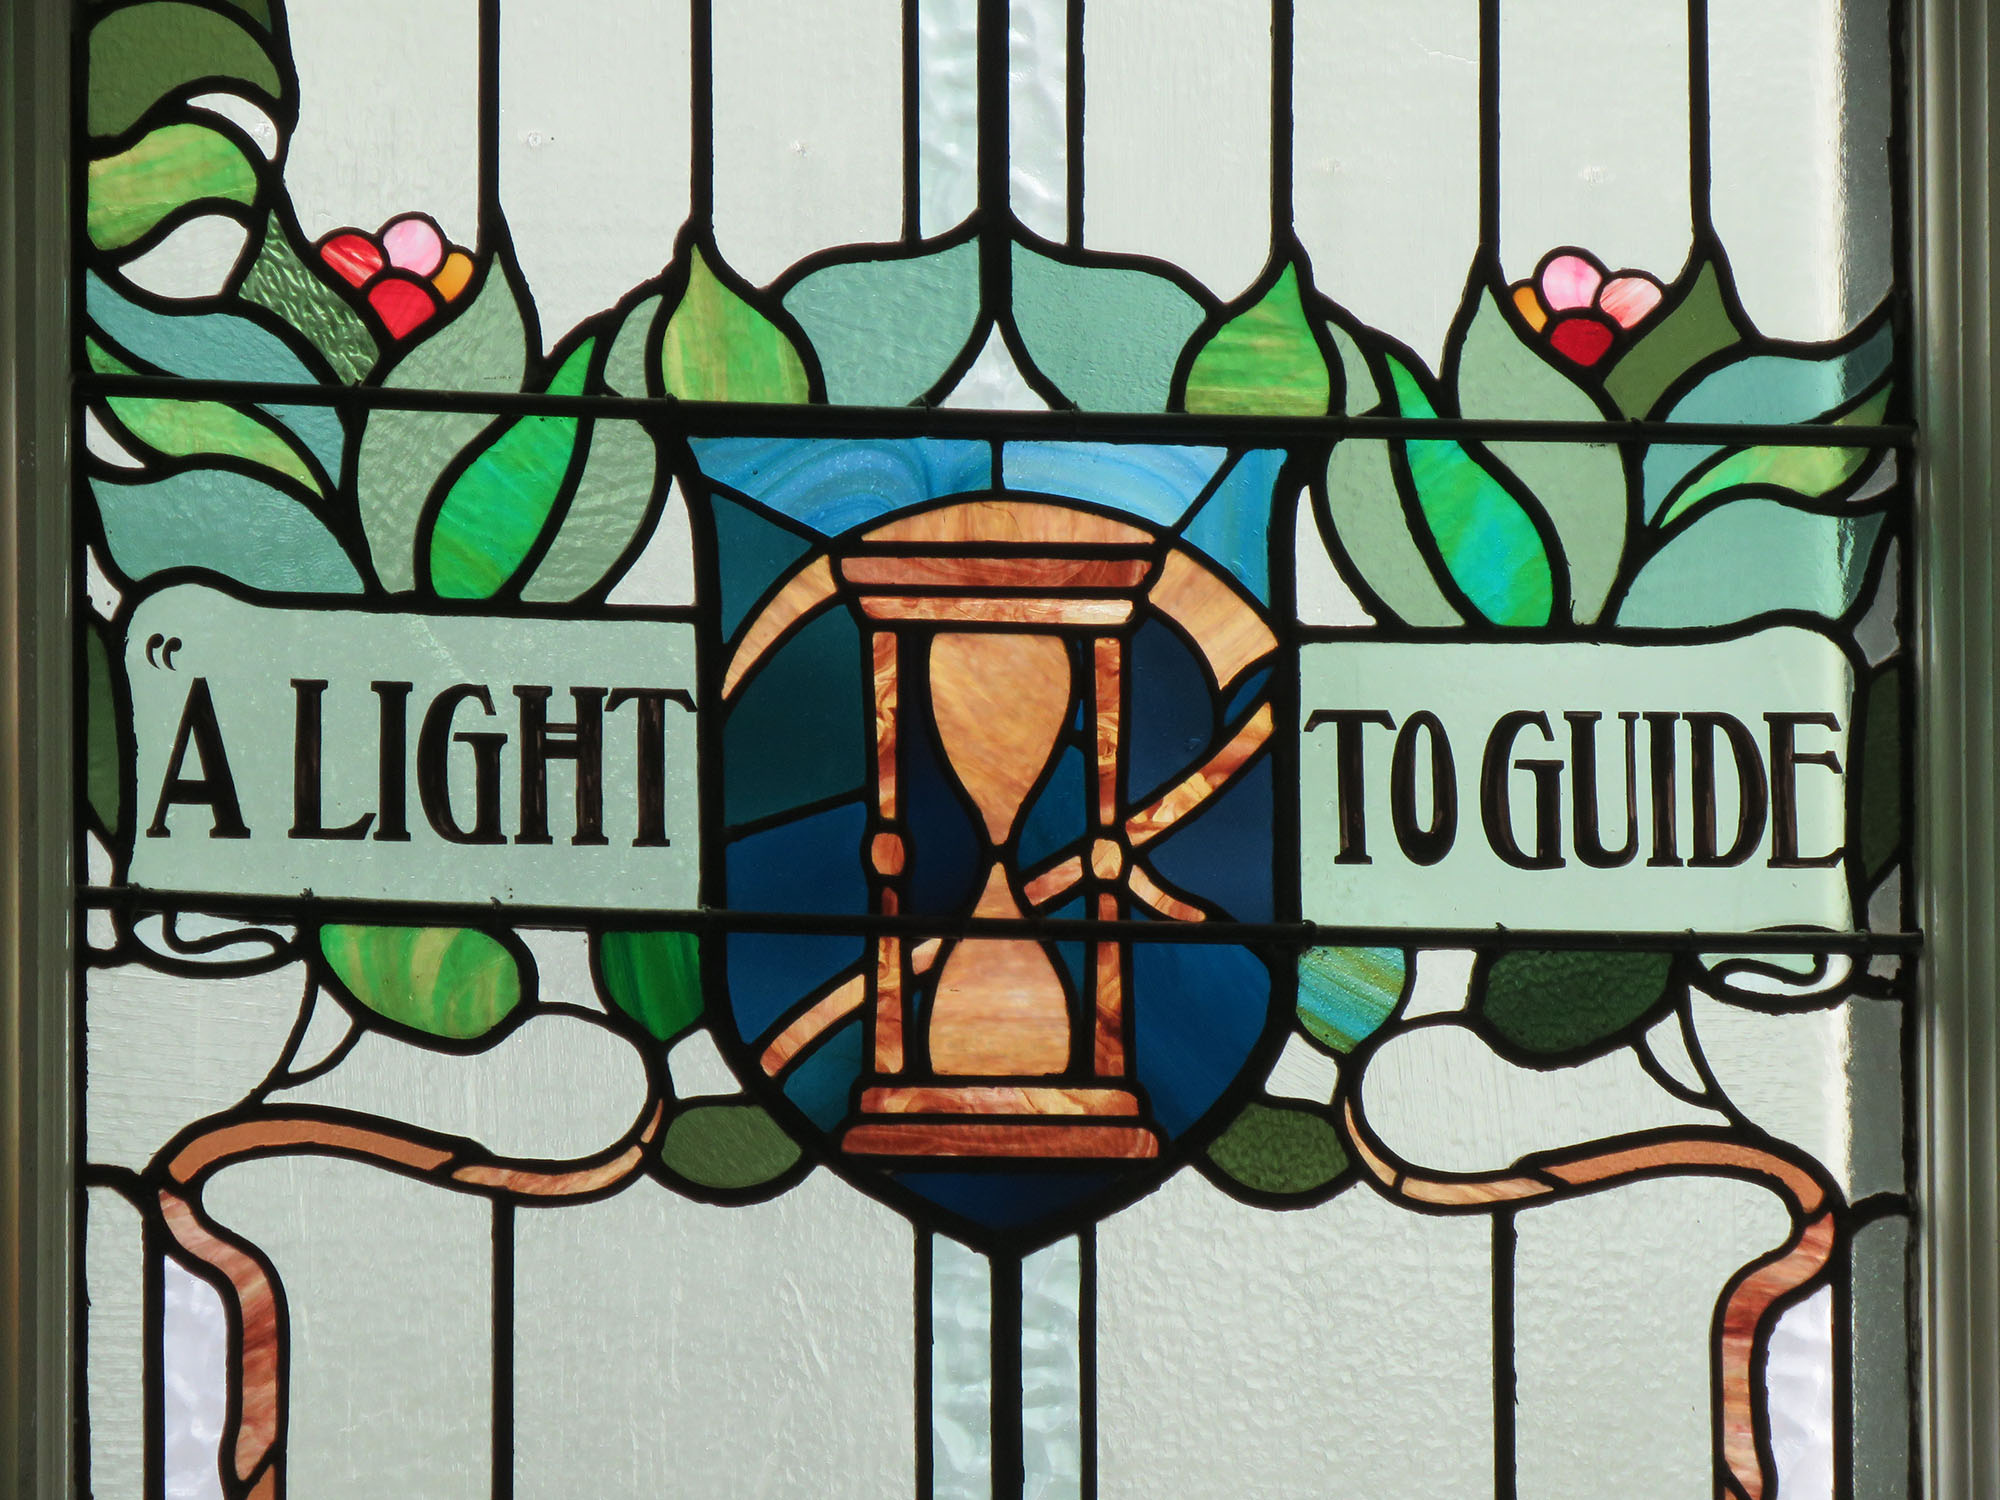 4.-DETAIL-FROM-ACCRINGTON-LIBRARY-WINDOW-DESIGNED-BY-HENRY-GUSTAVE-HILLER.-PHOTO-CREDIT-LANCASHIRE-COUNTY-LIBRARIES